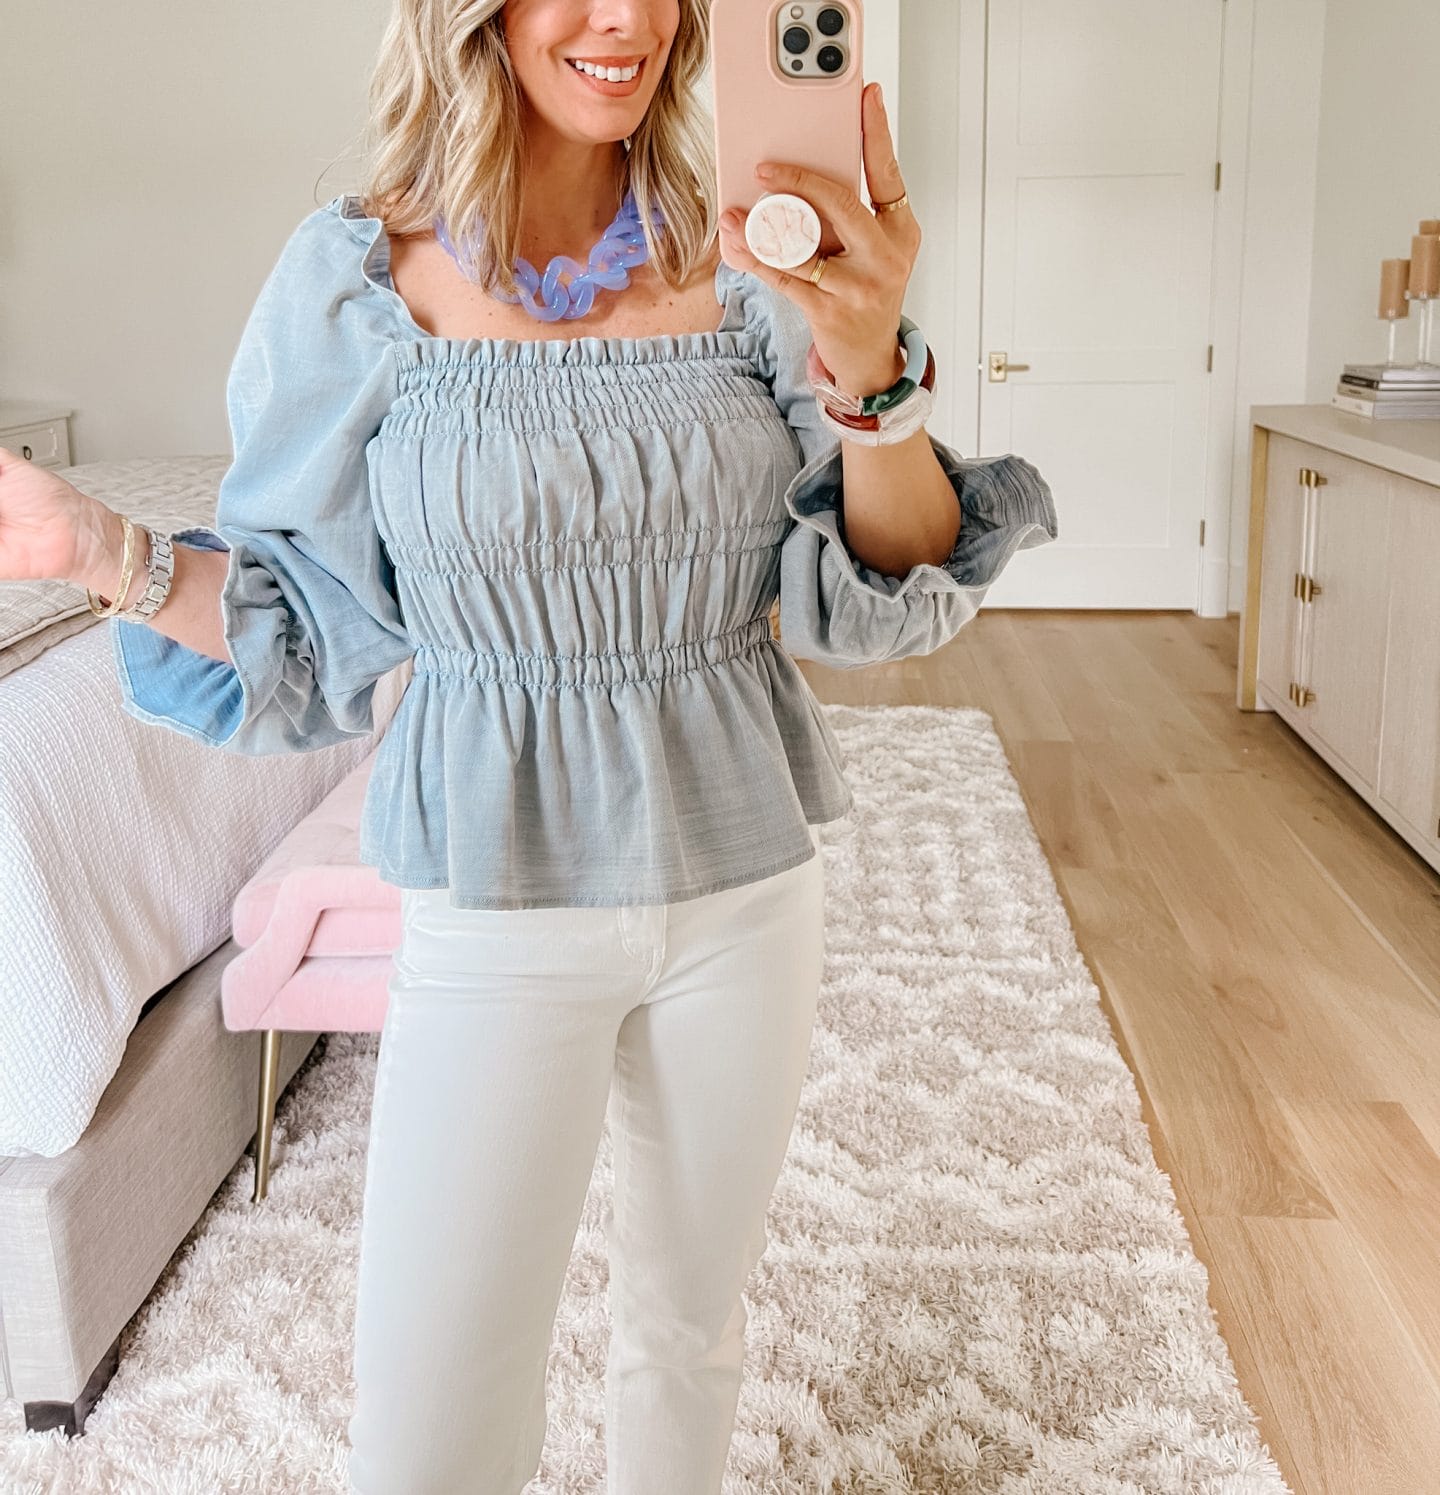 Blue Chambray Peplum Top, White Jeans, Wedges 